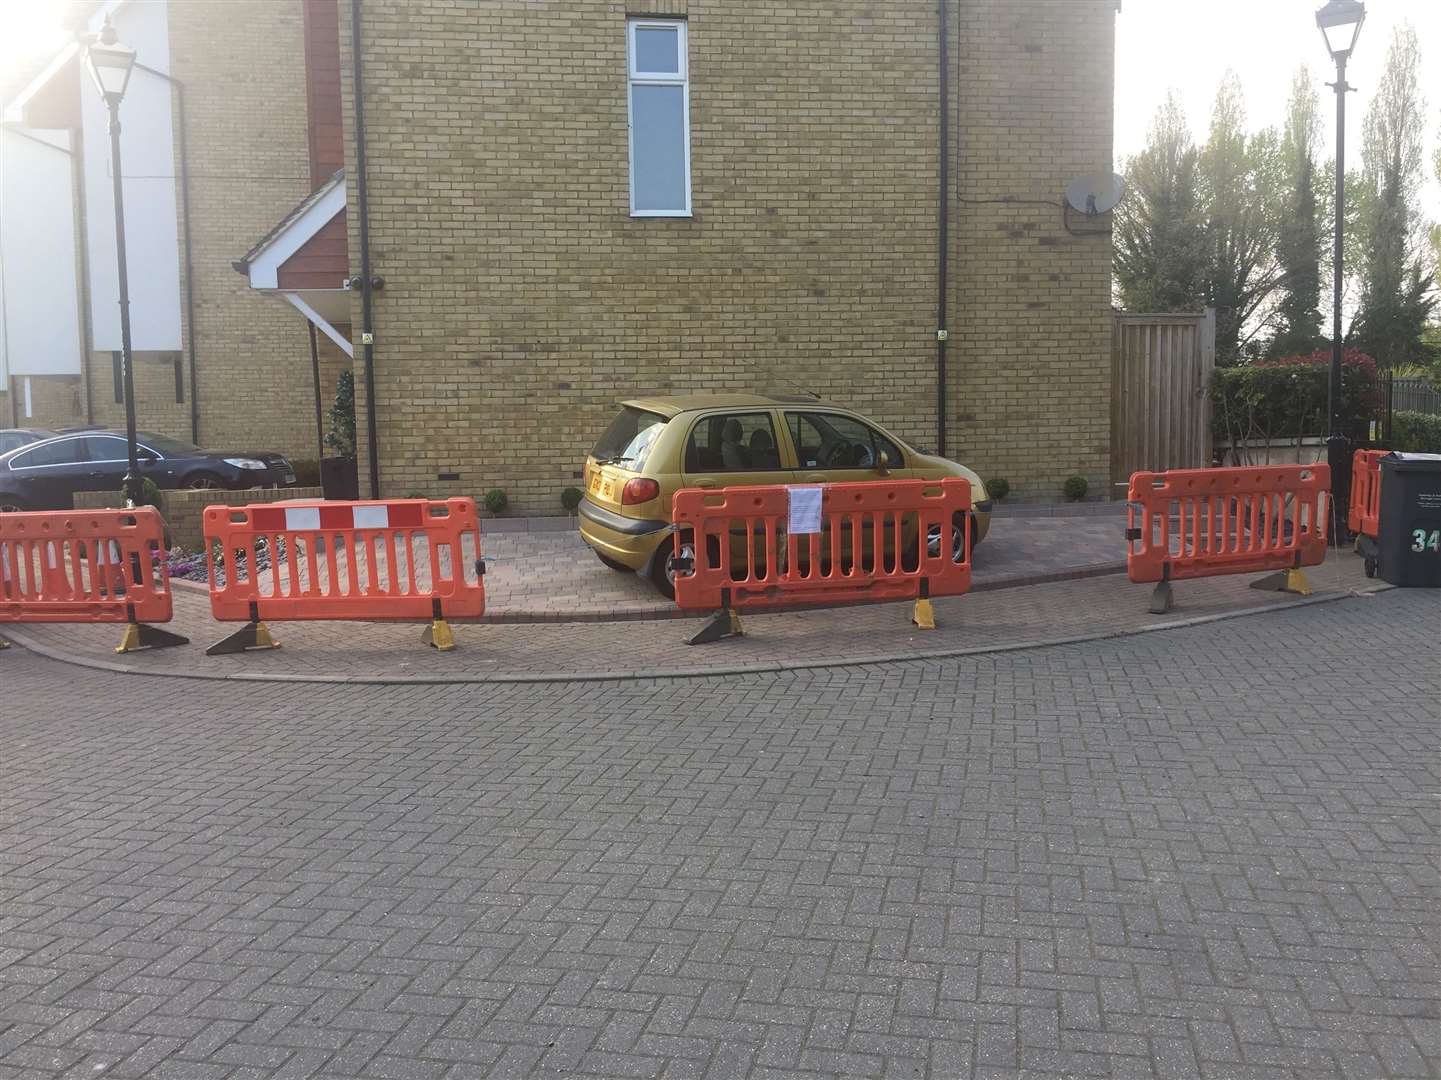 The barriers mean no one comes near Ms Barrett if she is coming in from her car or doing gardening